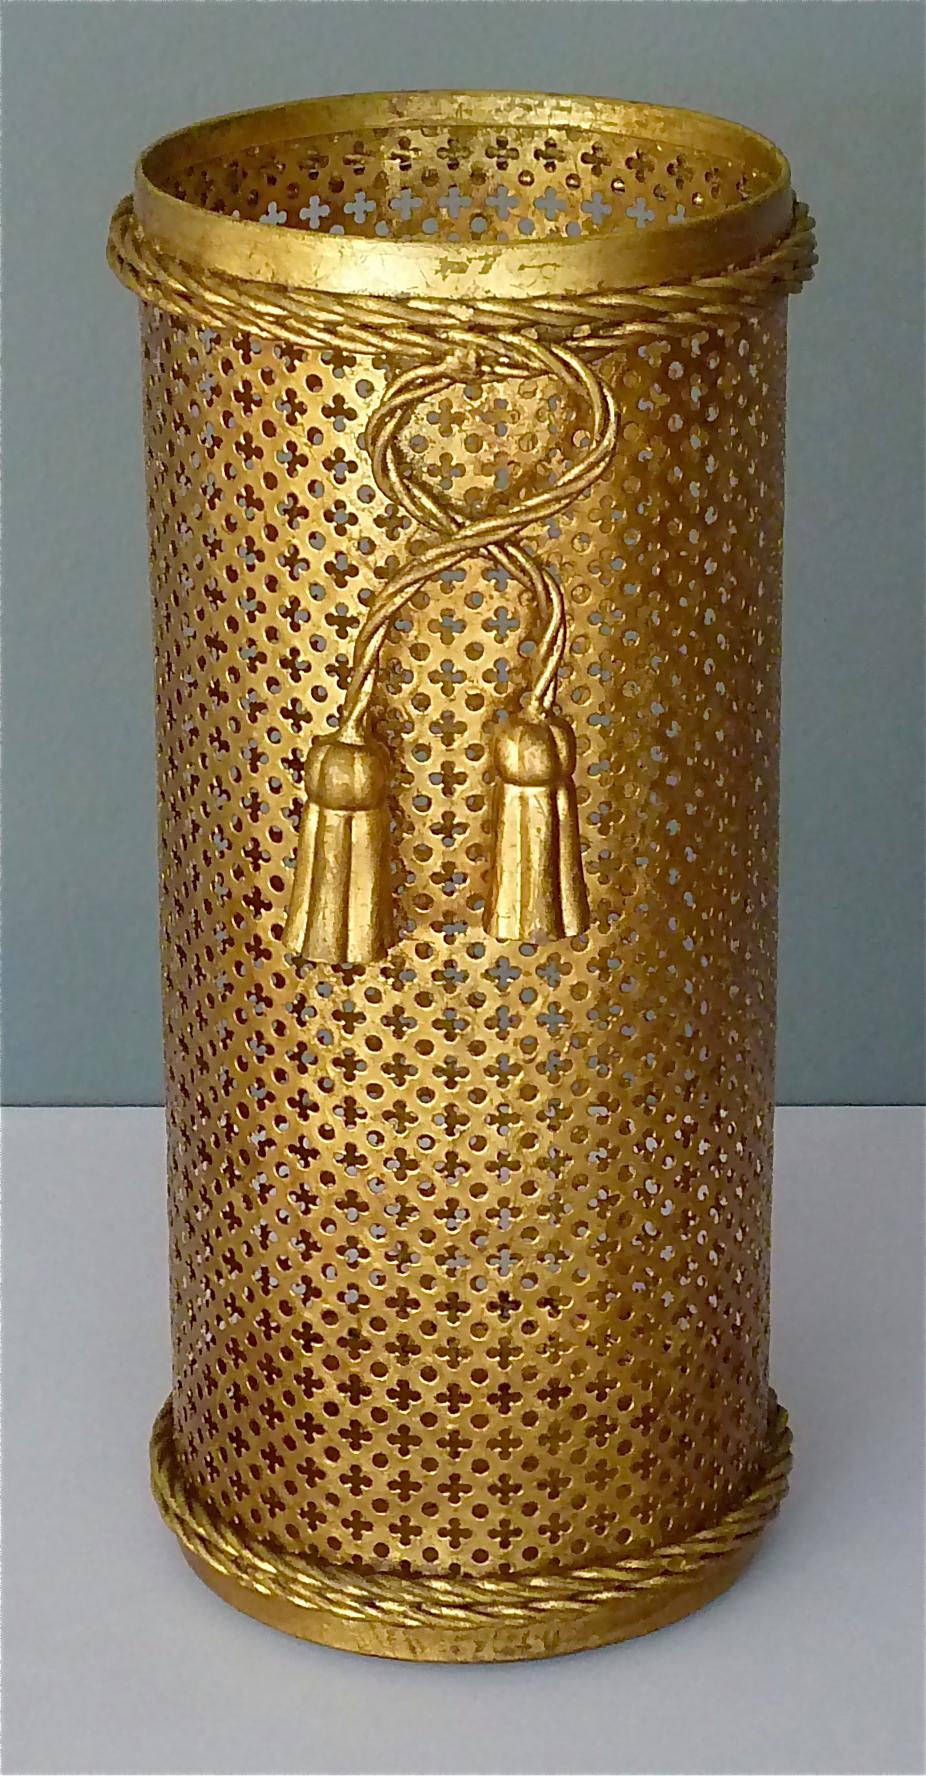 Italian Midcentury Umbrella Stand Gilt Perforated Metal, Hans Kögl Style, 1950s For Sale 4